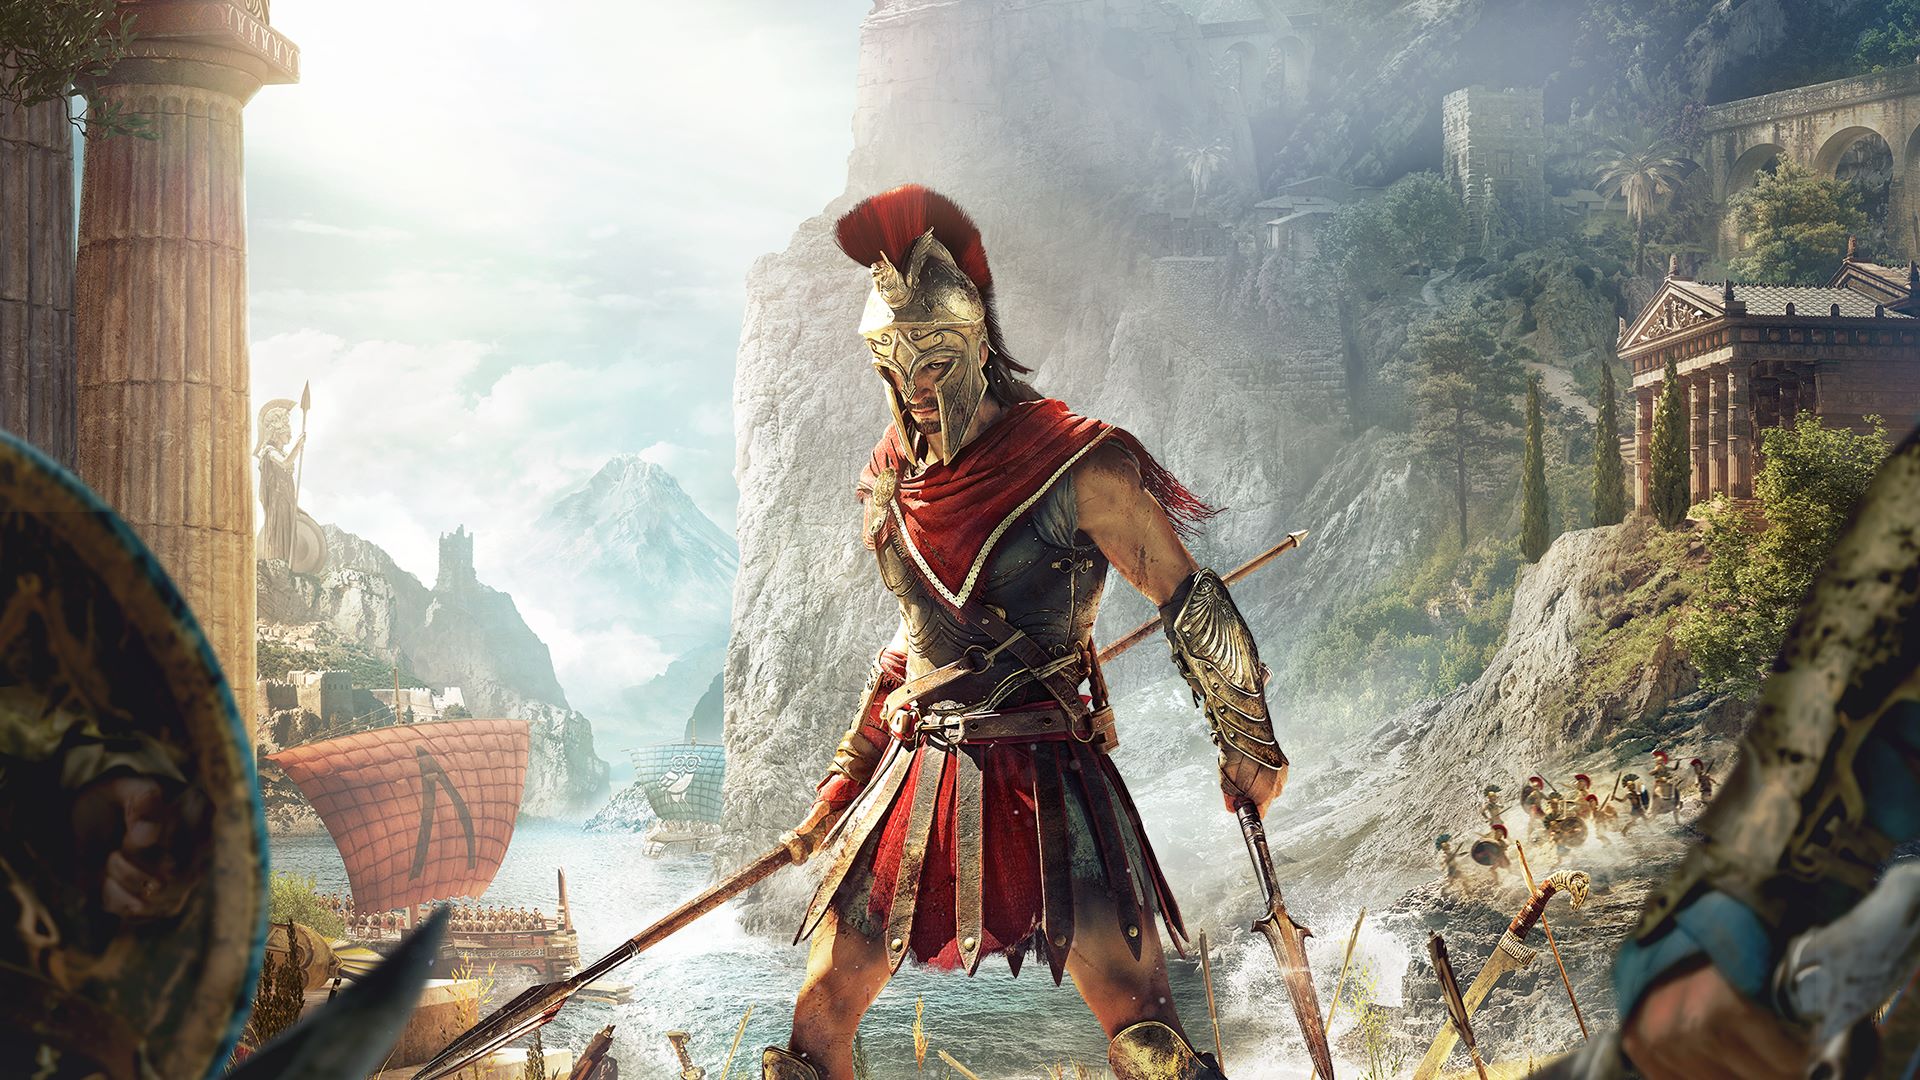 Ubisoft reveals Assassin’s Creed Odyssey post-launch plan